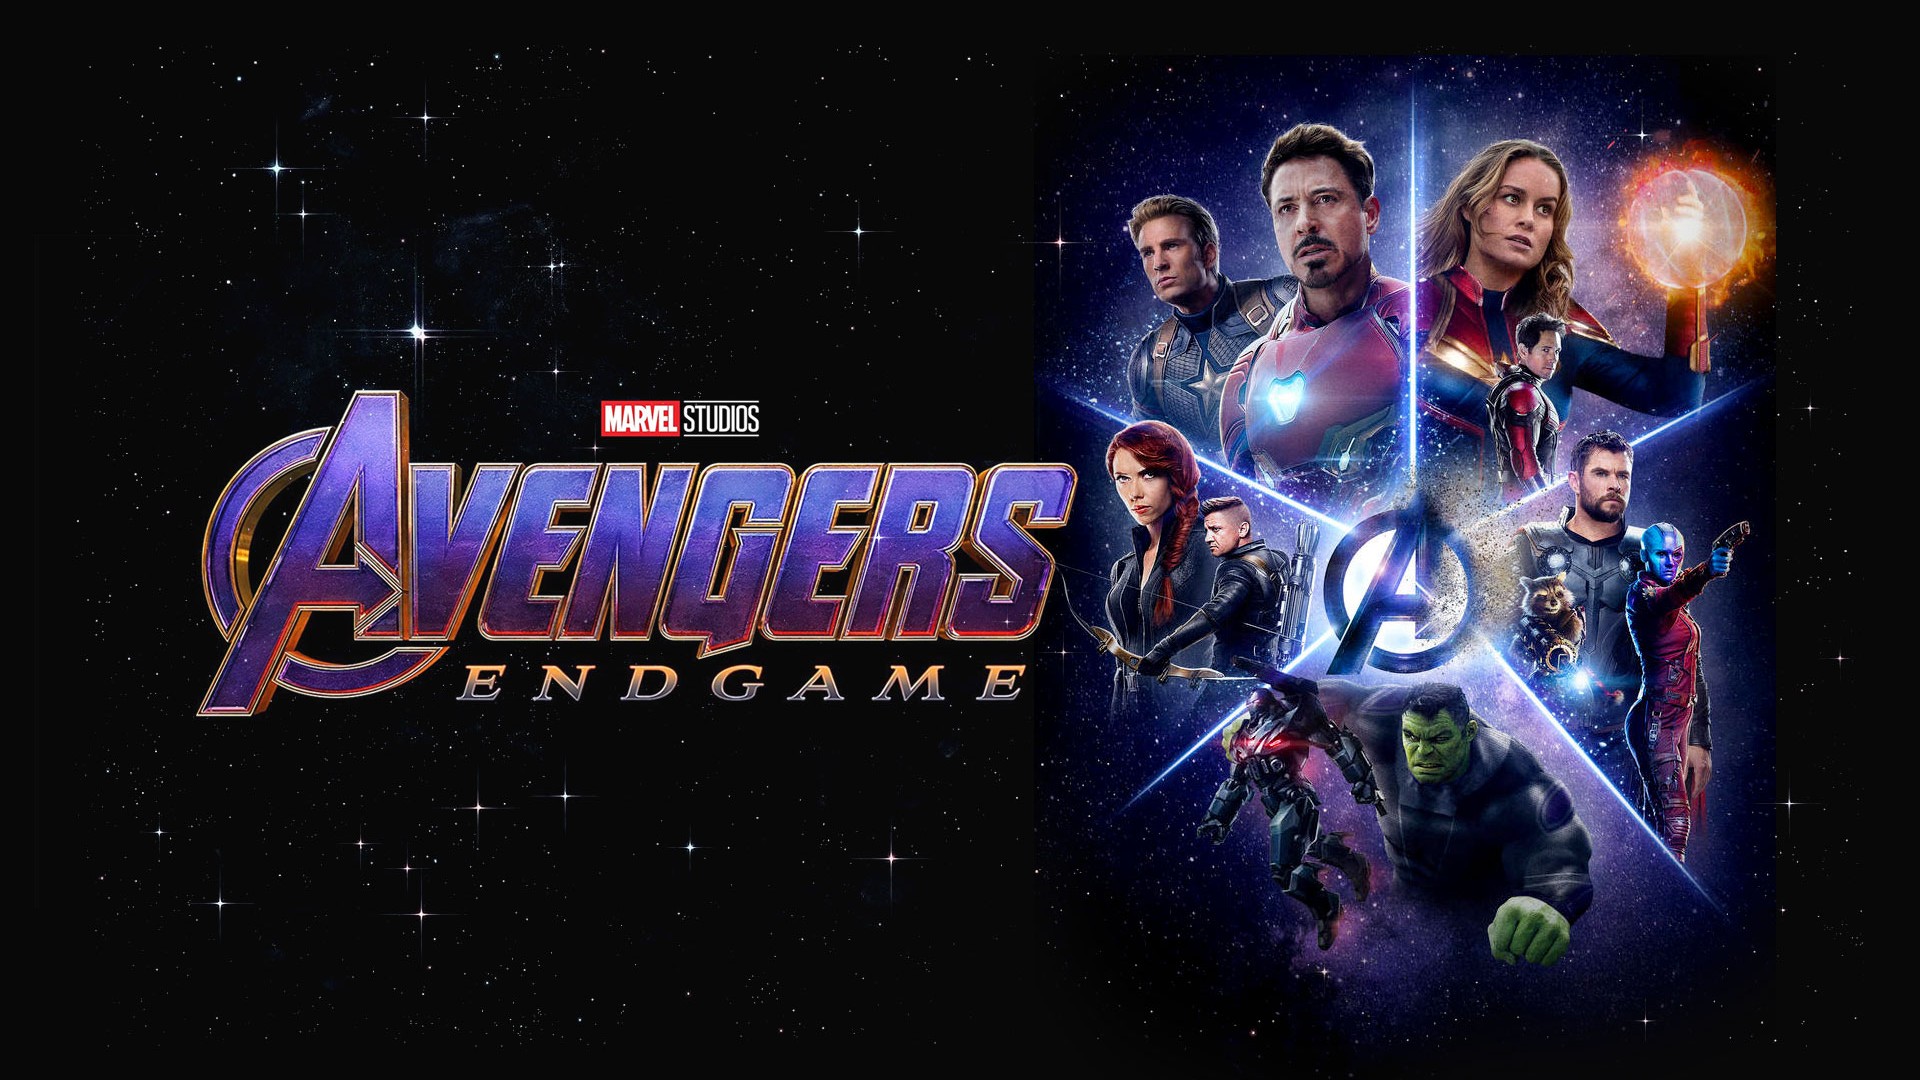 Avengers Endgame 2019 Backgrounds with high-resolution 1920x1080 pixel. You can use this poster wallpaper for your Desktop Computers, Mac Screensavers, Windows Backgrounds, iPhone Wallpapers, Tablet or Android Lock screen and another Mobile device